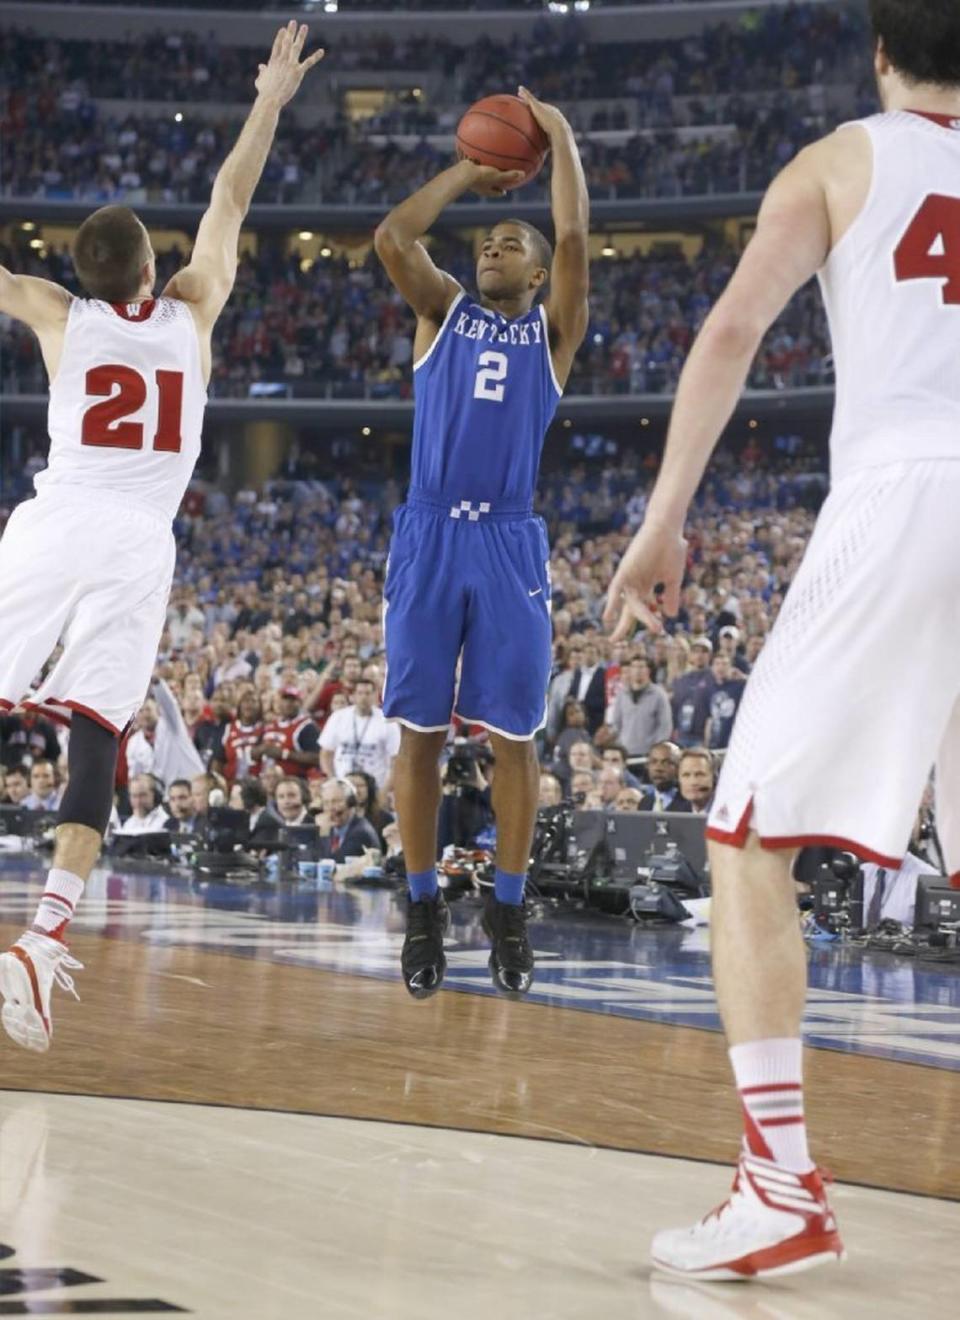 Aaron Harrison made a deep 3-pointer with seconds to play to send Kentucky past Wisconsin and into the 2014 national title game.